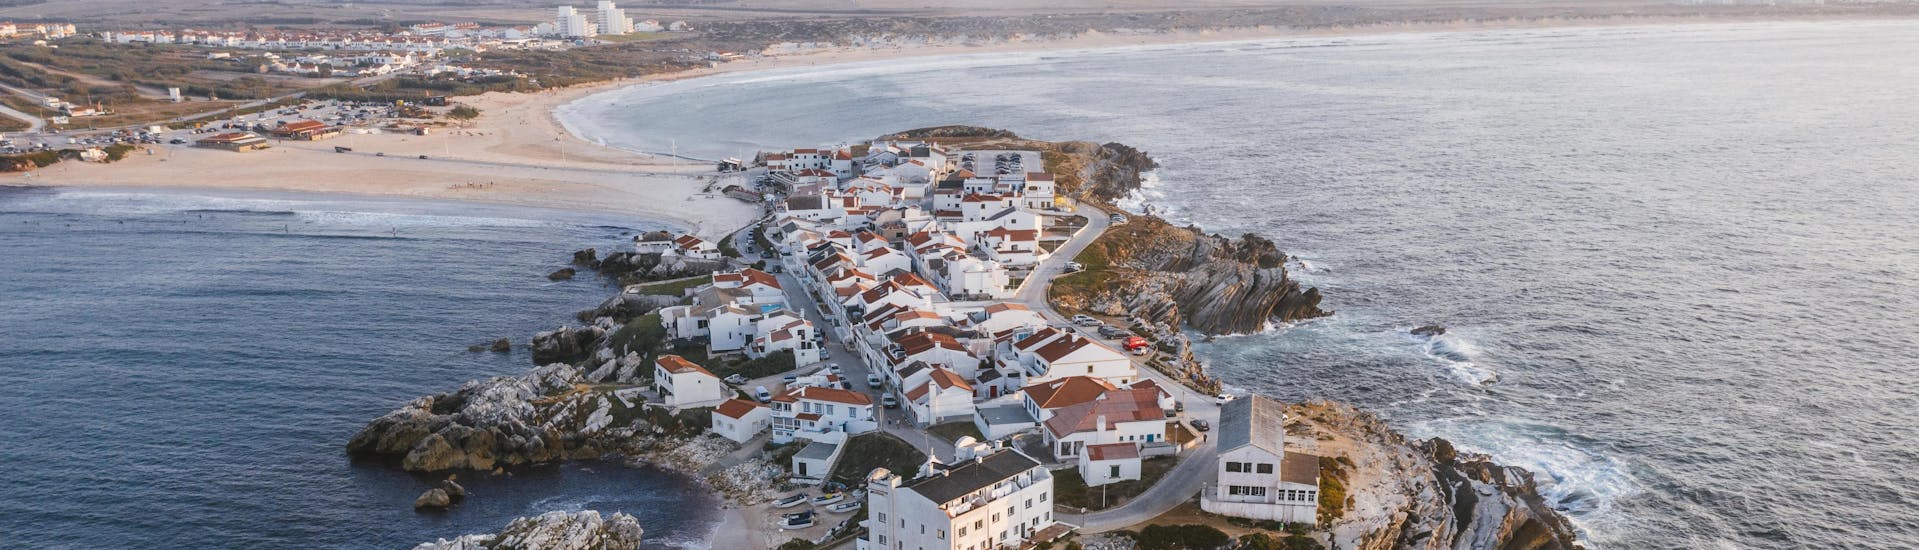 An areal view of the rocky peninsula that can be seen by visitors who go surfing in Peniche.